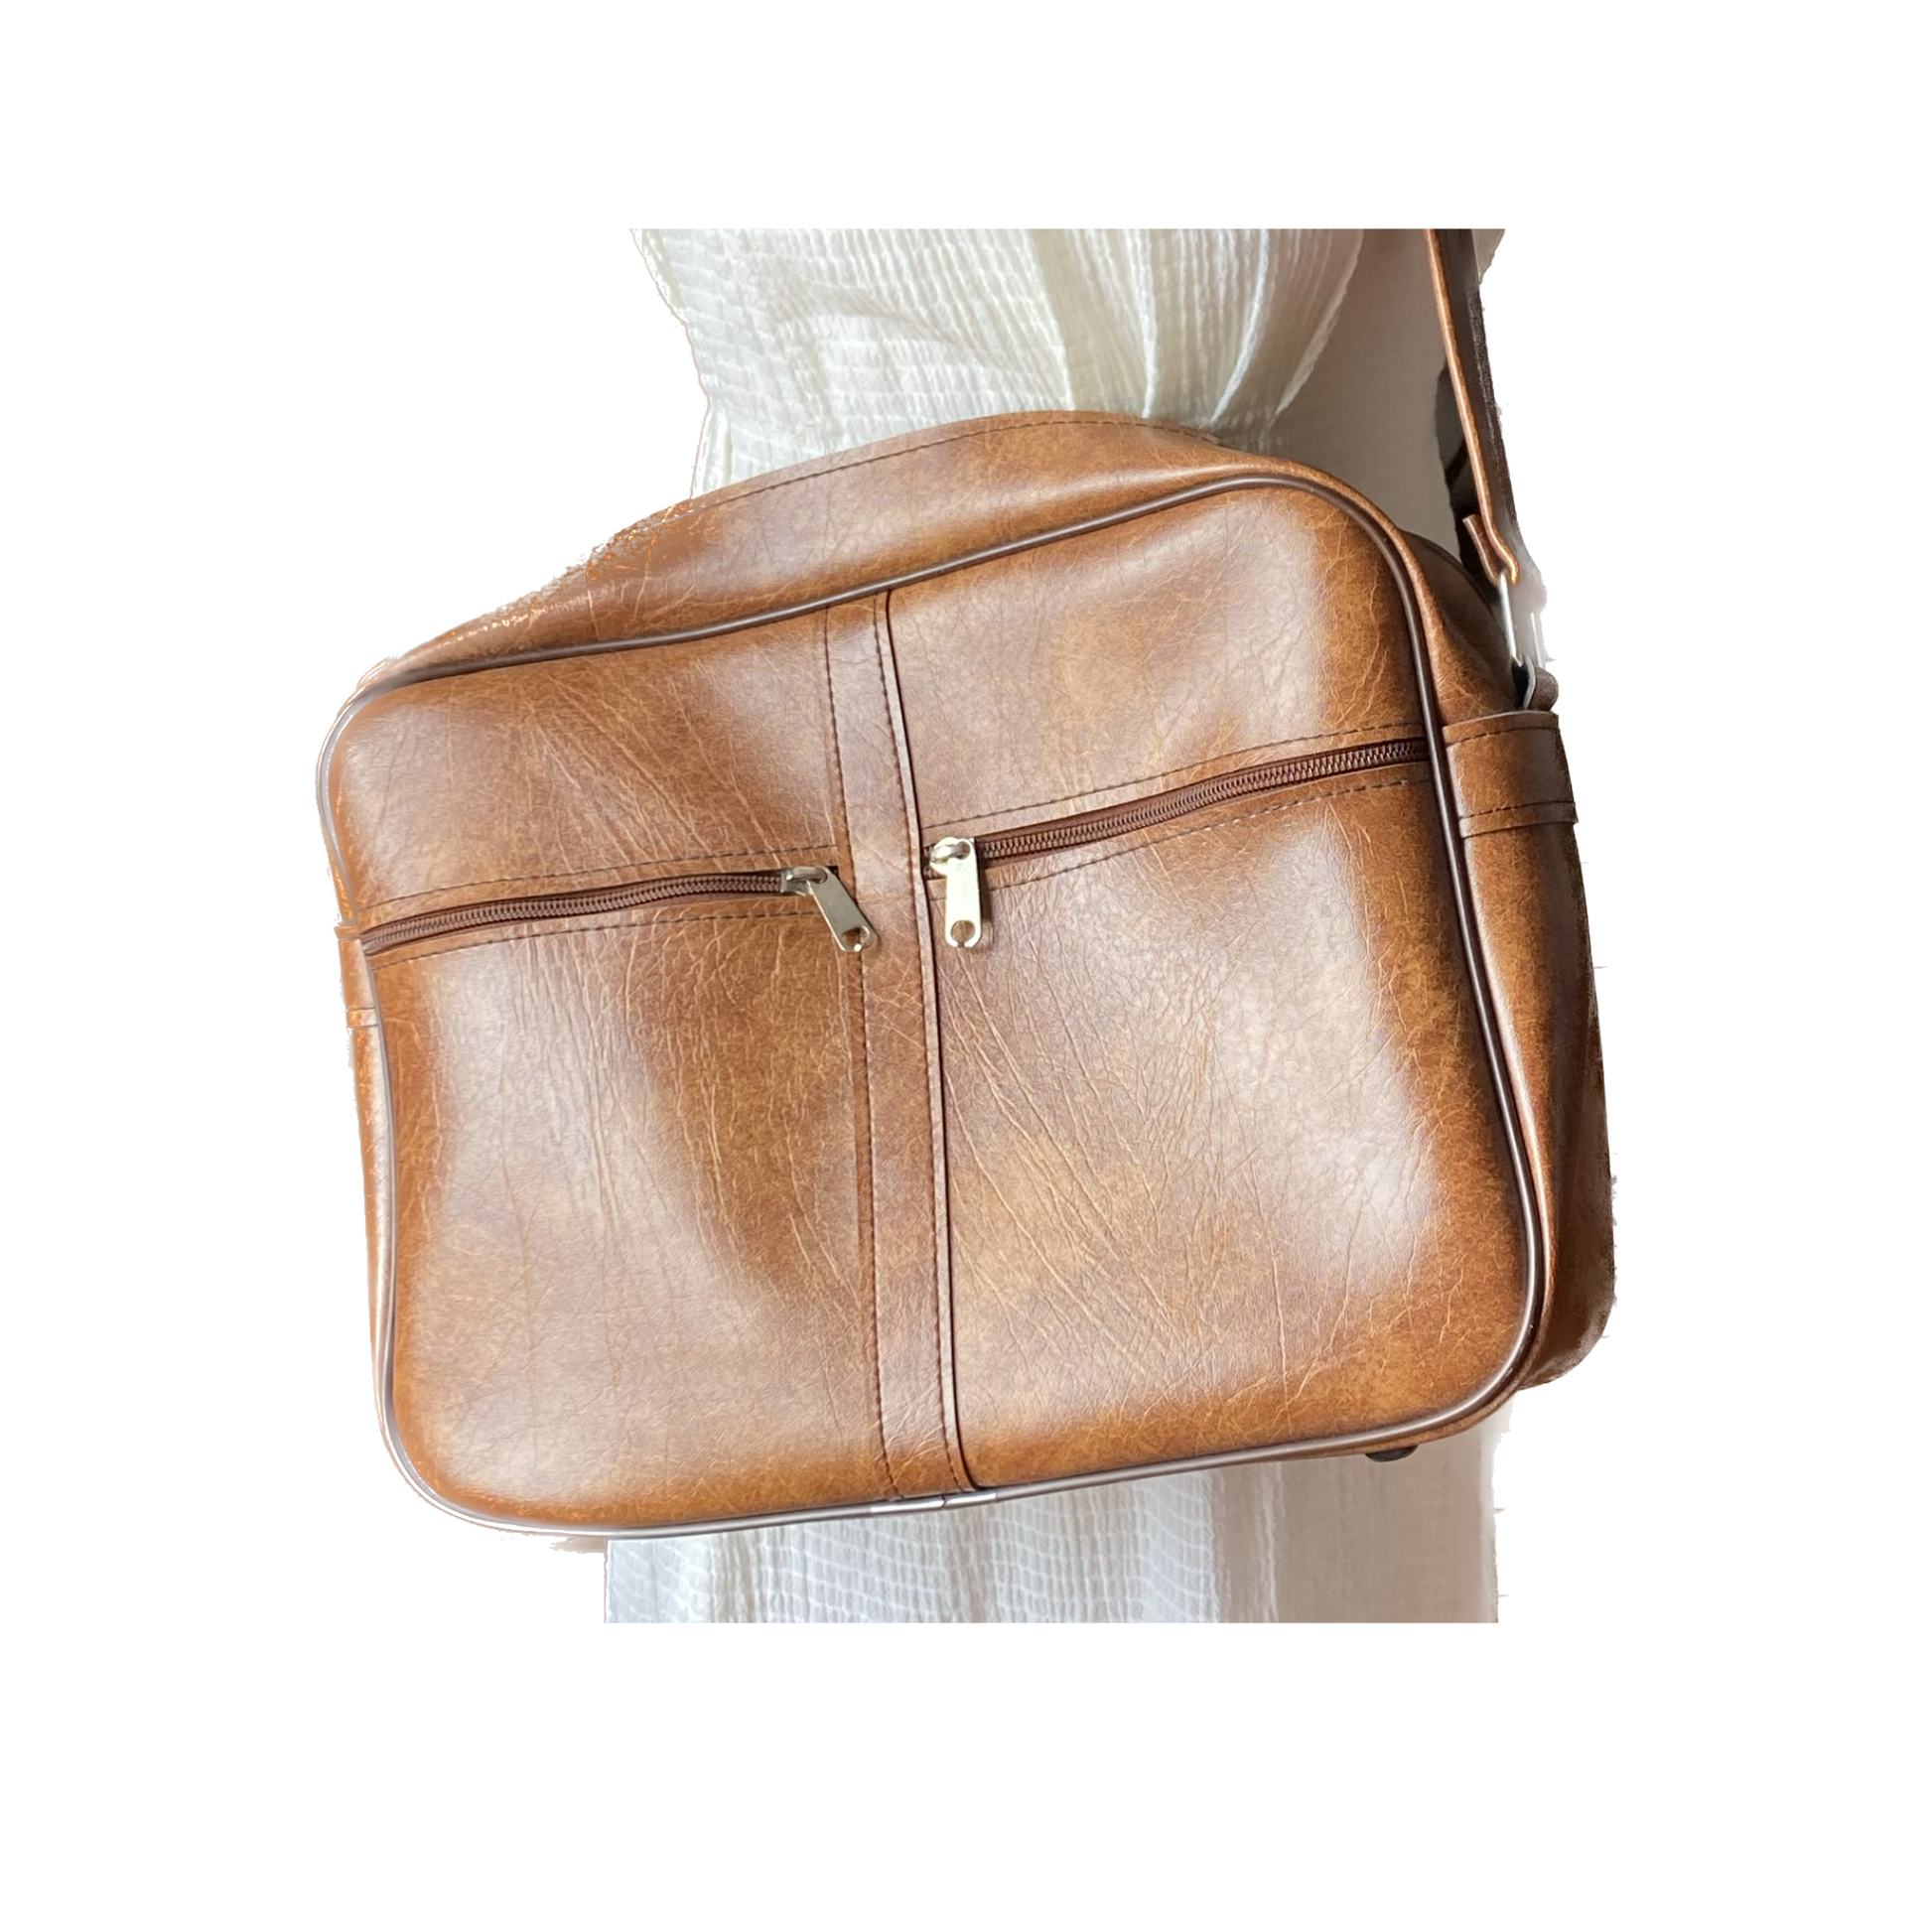 Light brown vinyl zip up bag with shoulder strap and two zip pockets 